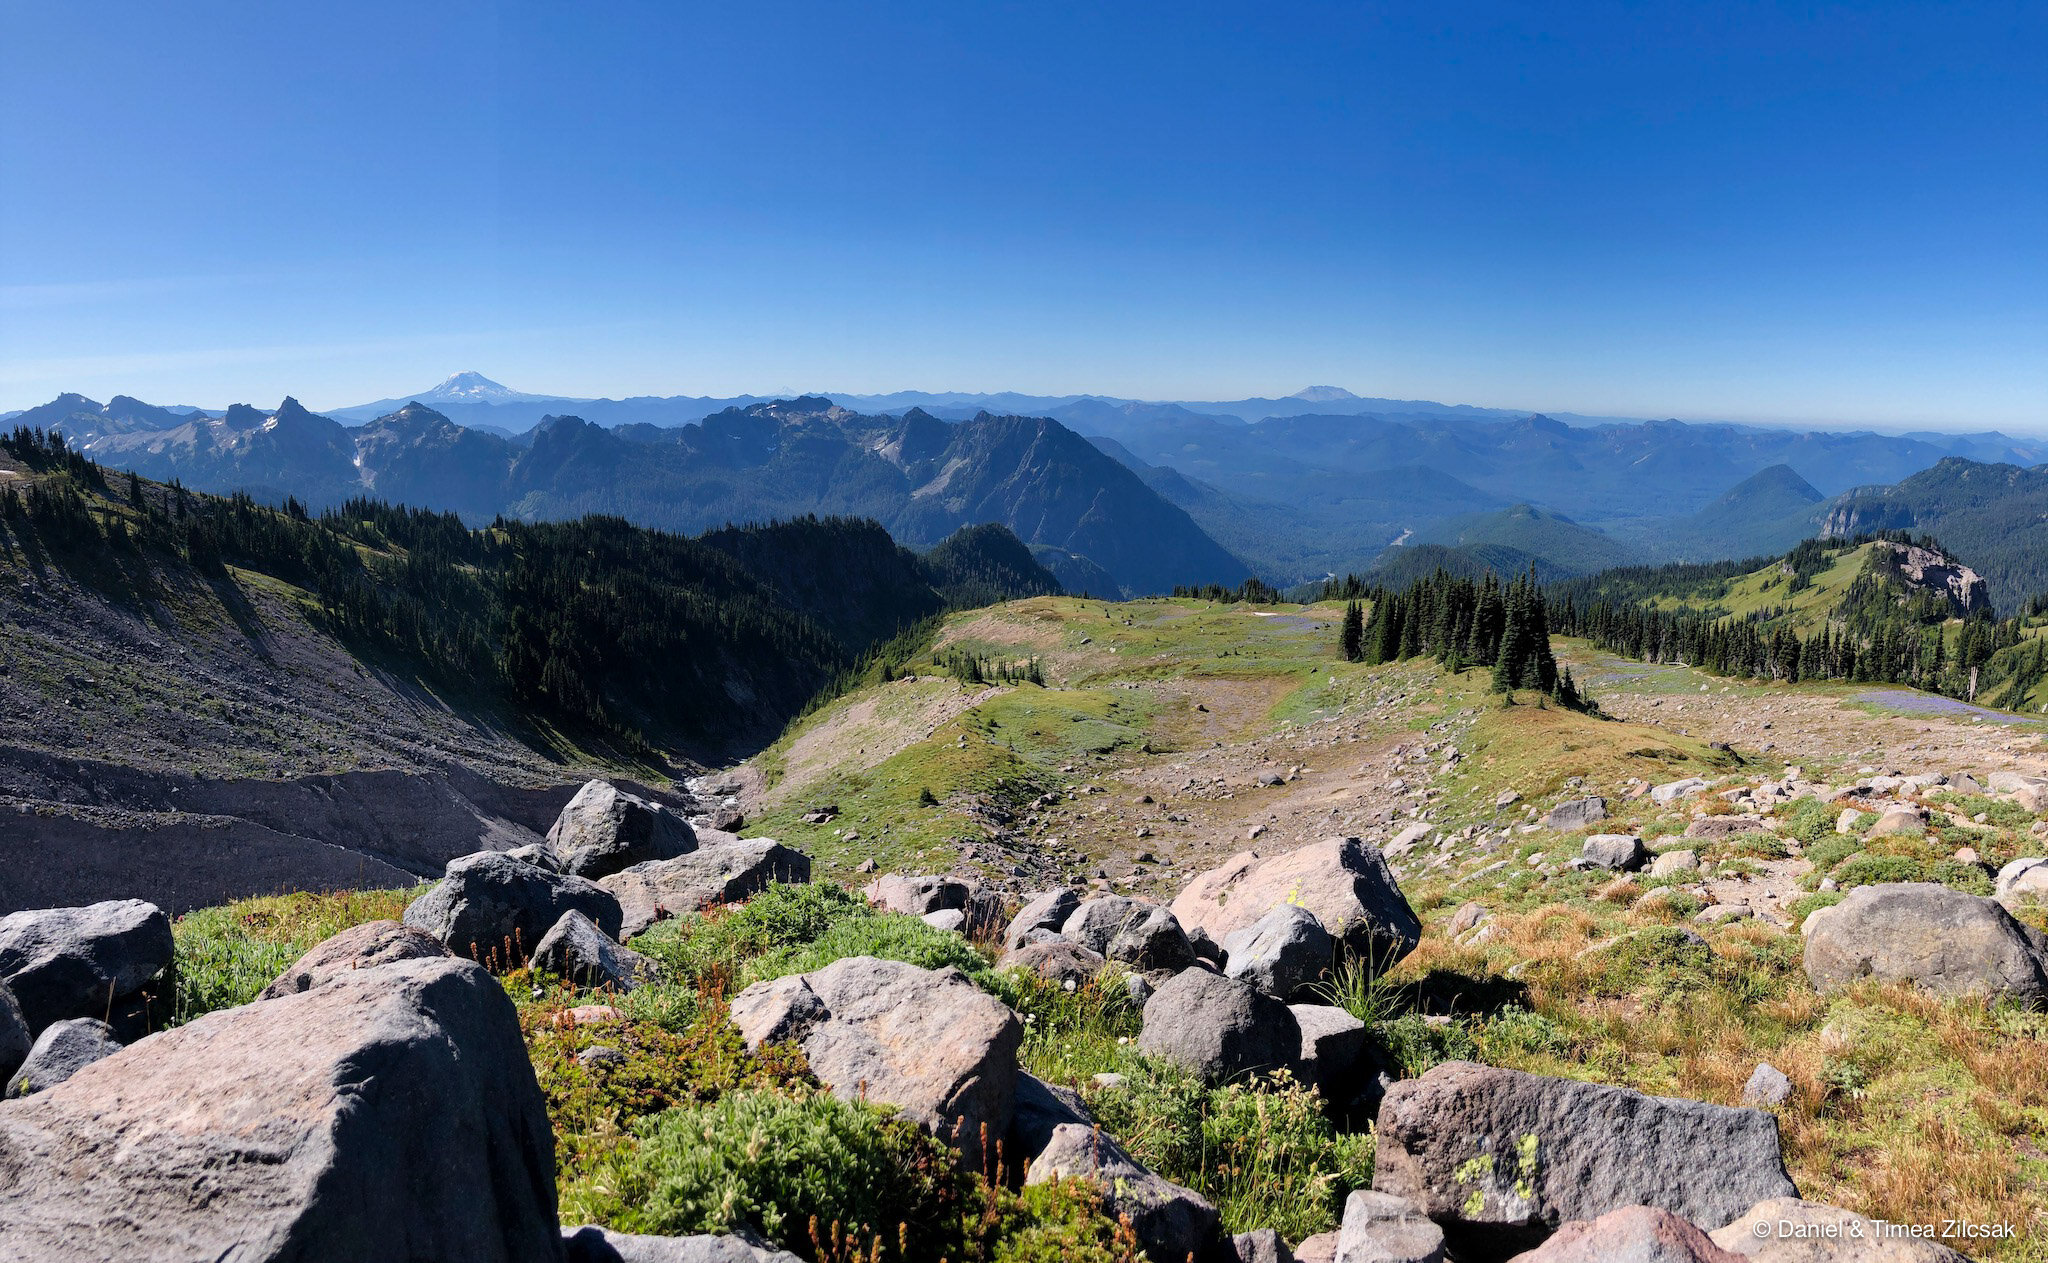 Lunch spot at Van Trump Park with views of the Tatoosh Range, Mount Adams and St. Helens